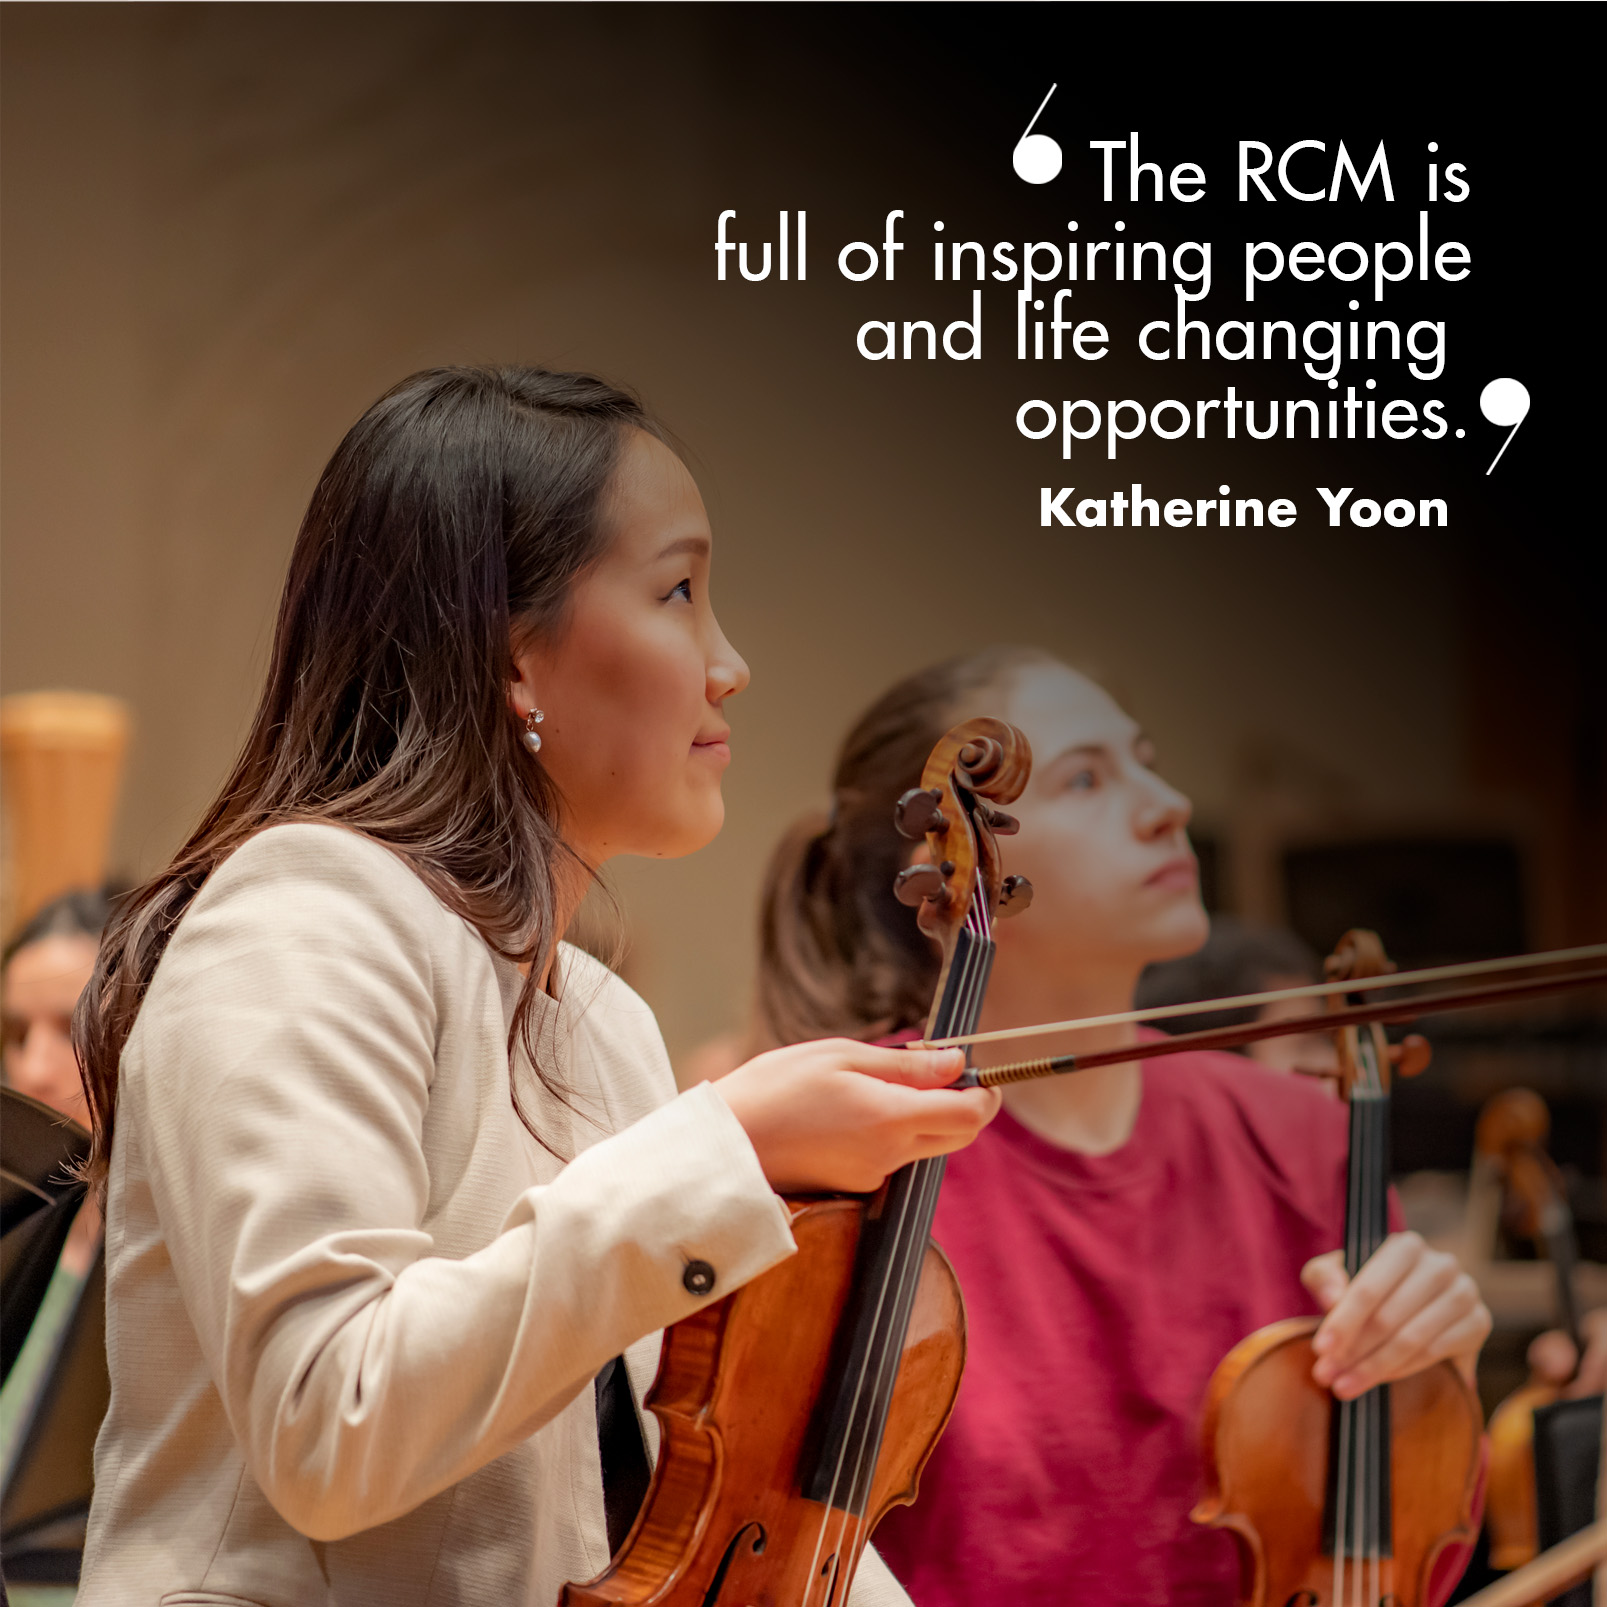 “The RCM is an incredible place, full of inspiring people and life changing opportunities". A female student, wearing a white jacket, sitting in an orchestral rehearsal, holding her bow and violin.